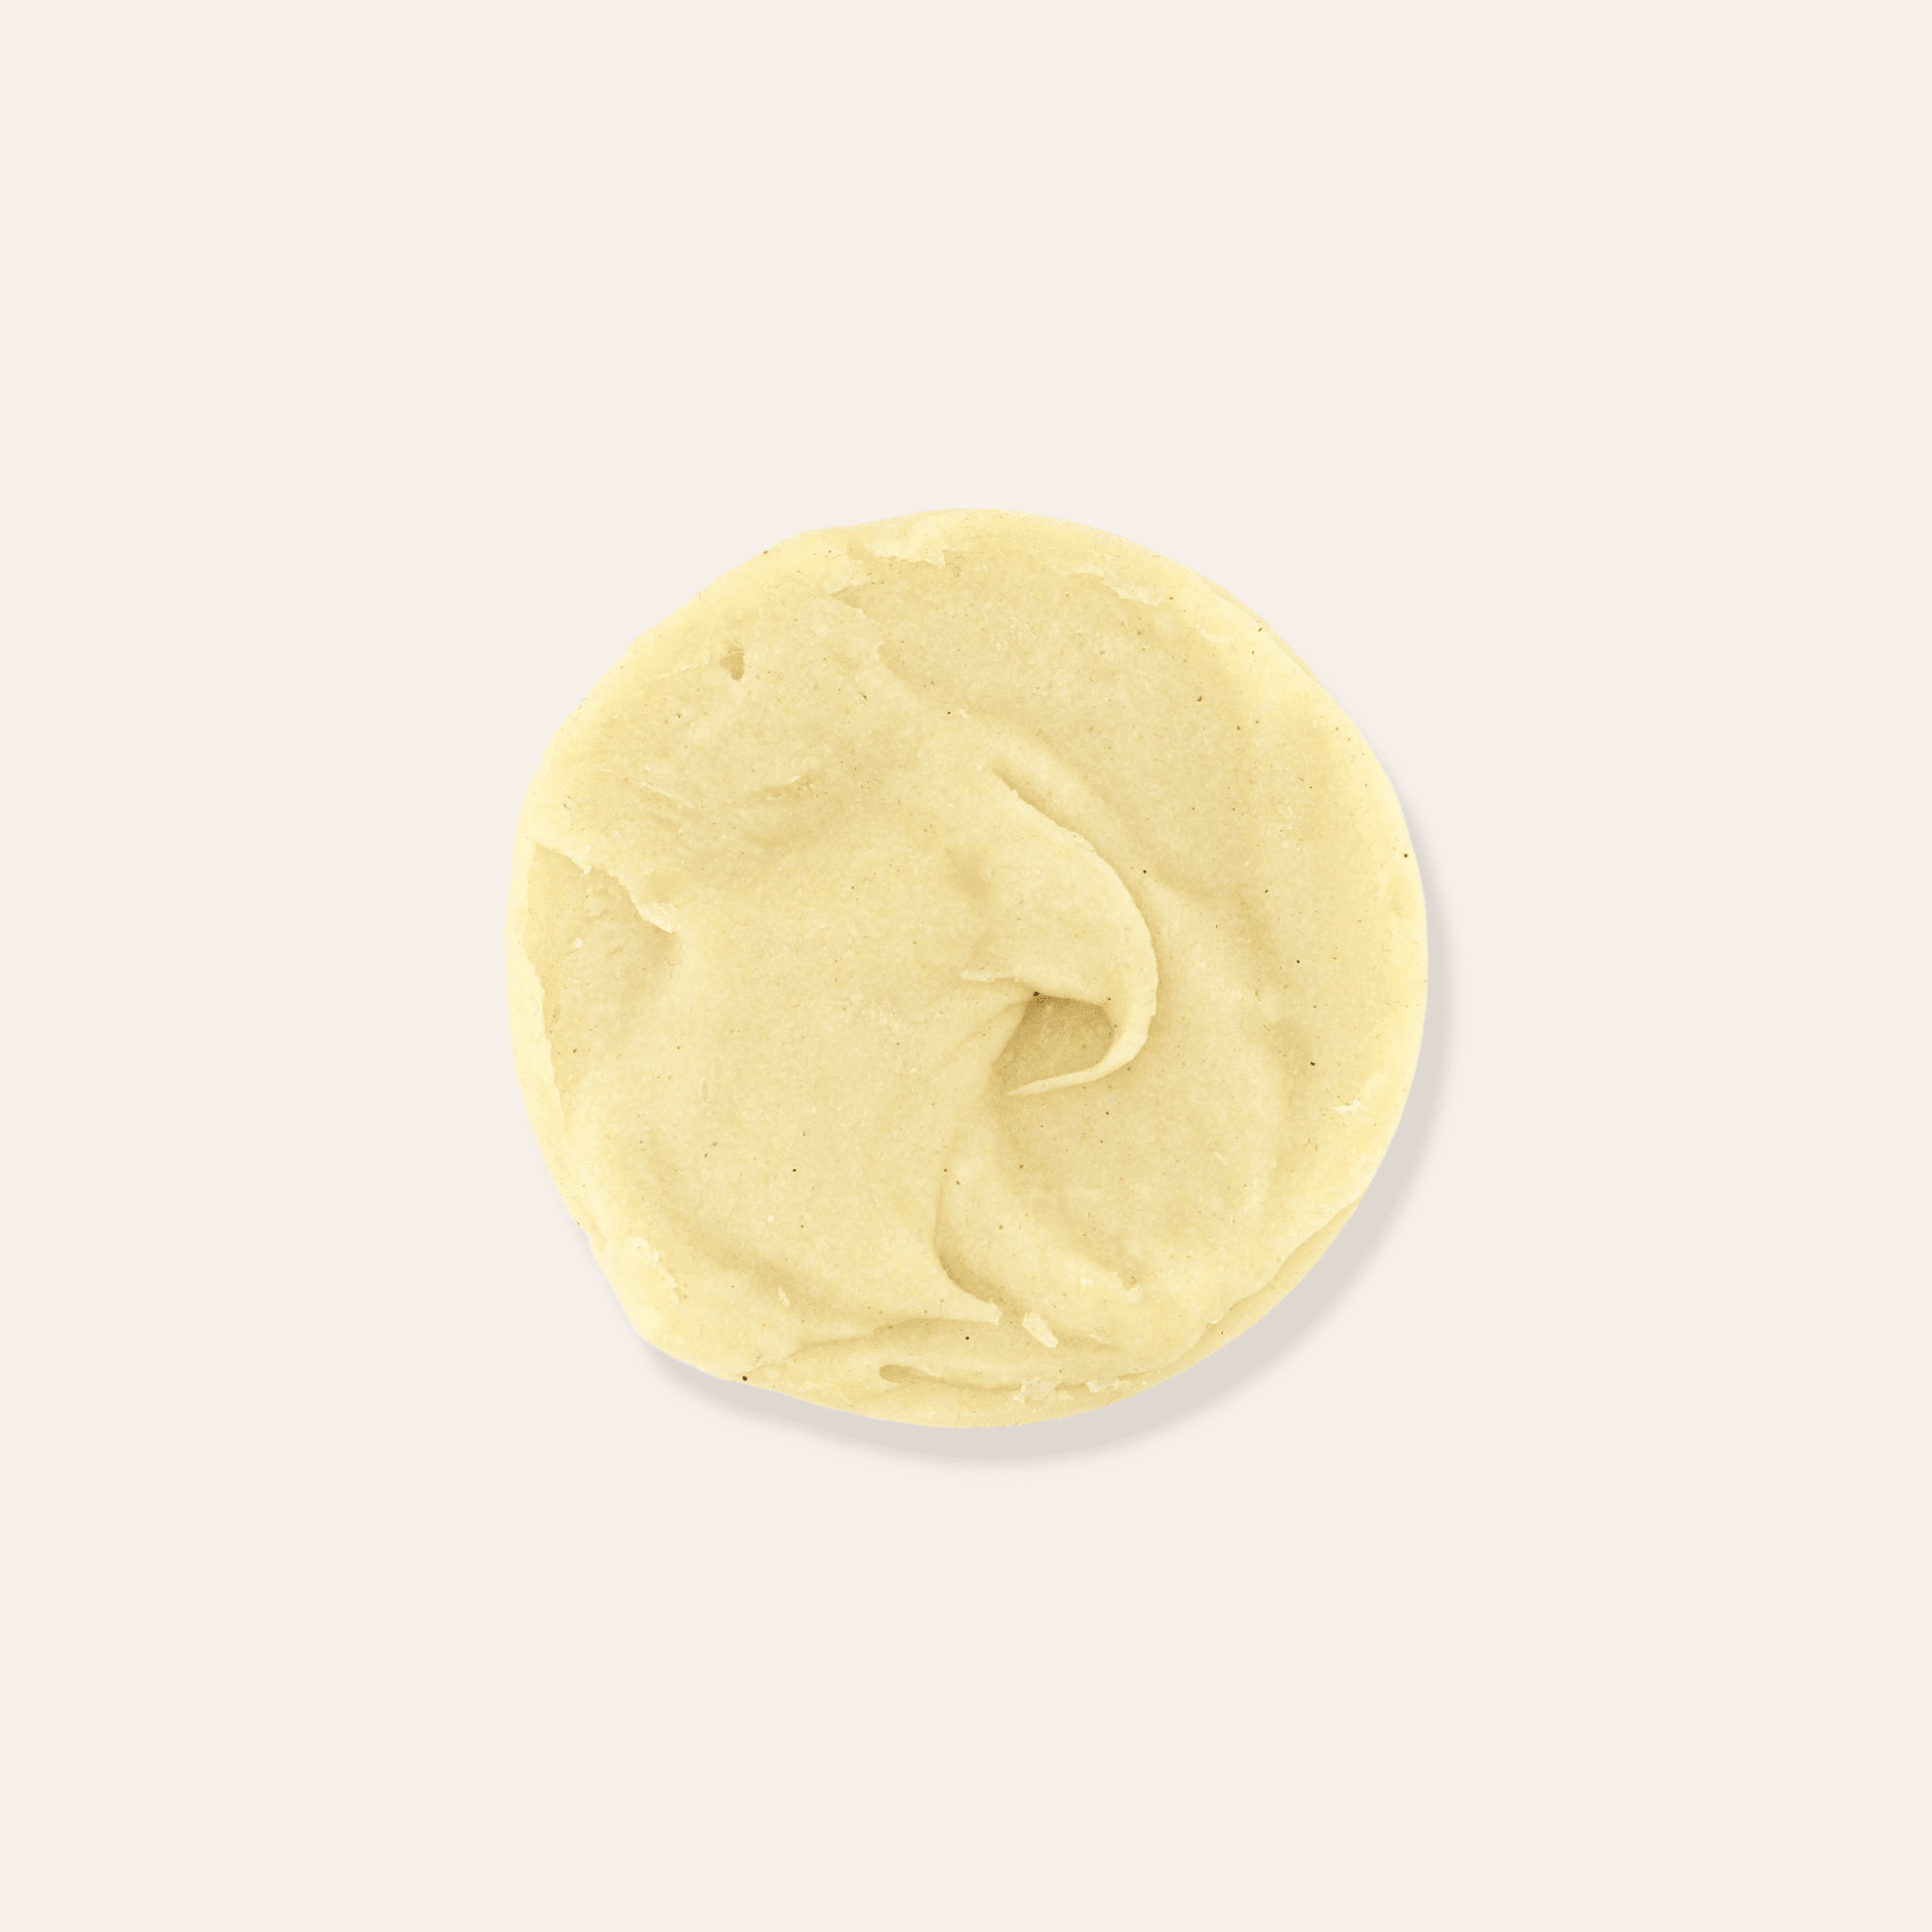 Solis, a yellow solid zero waste eco-friendly facial cleanser.